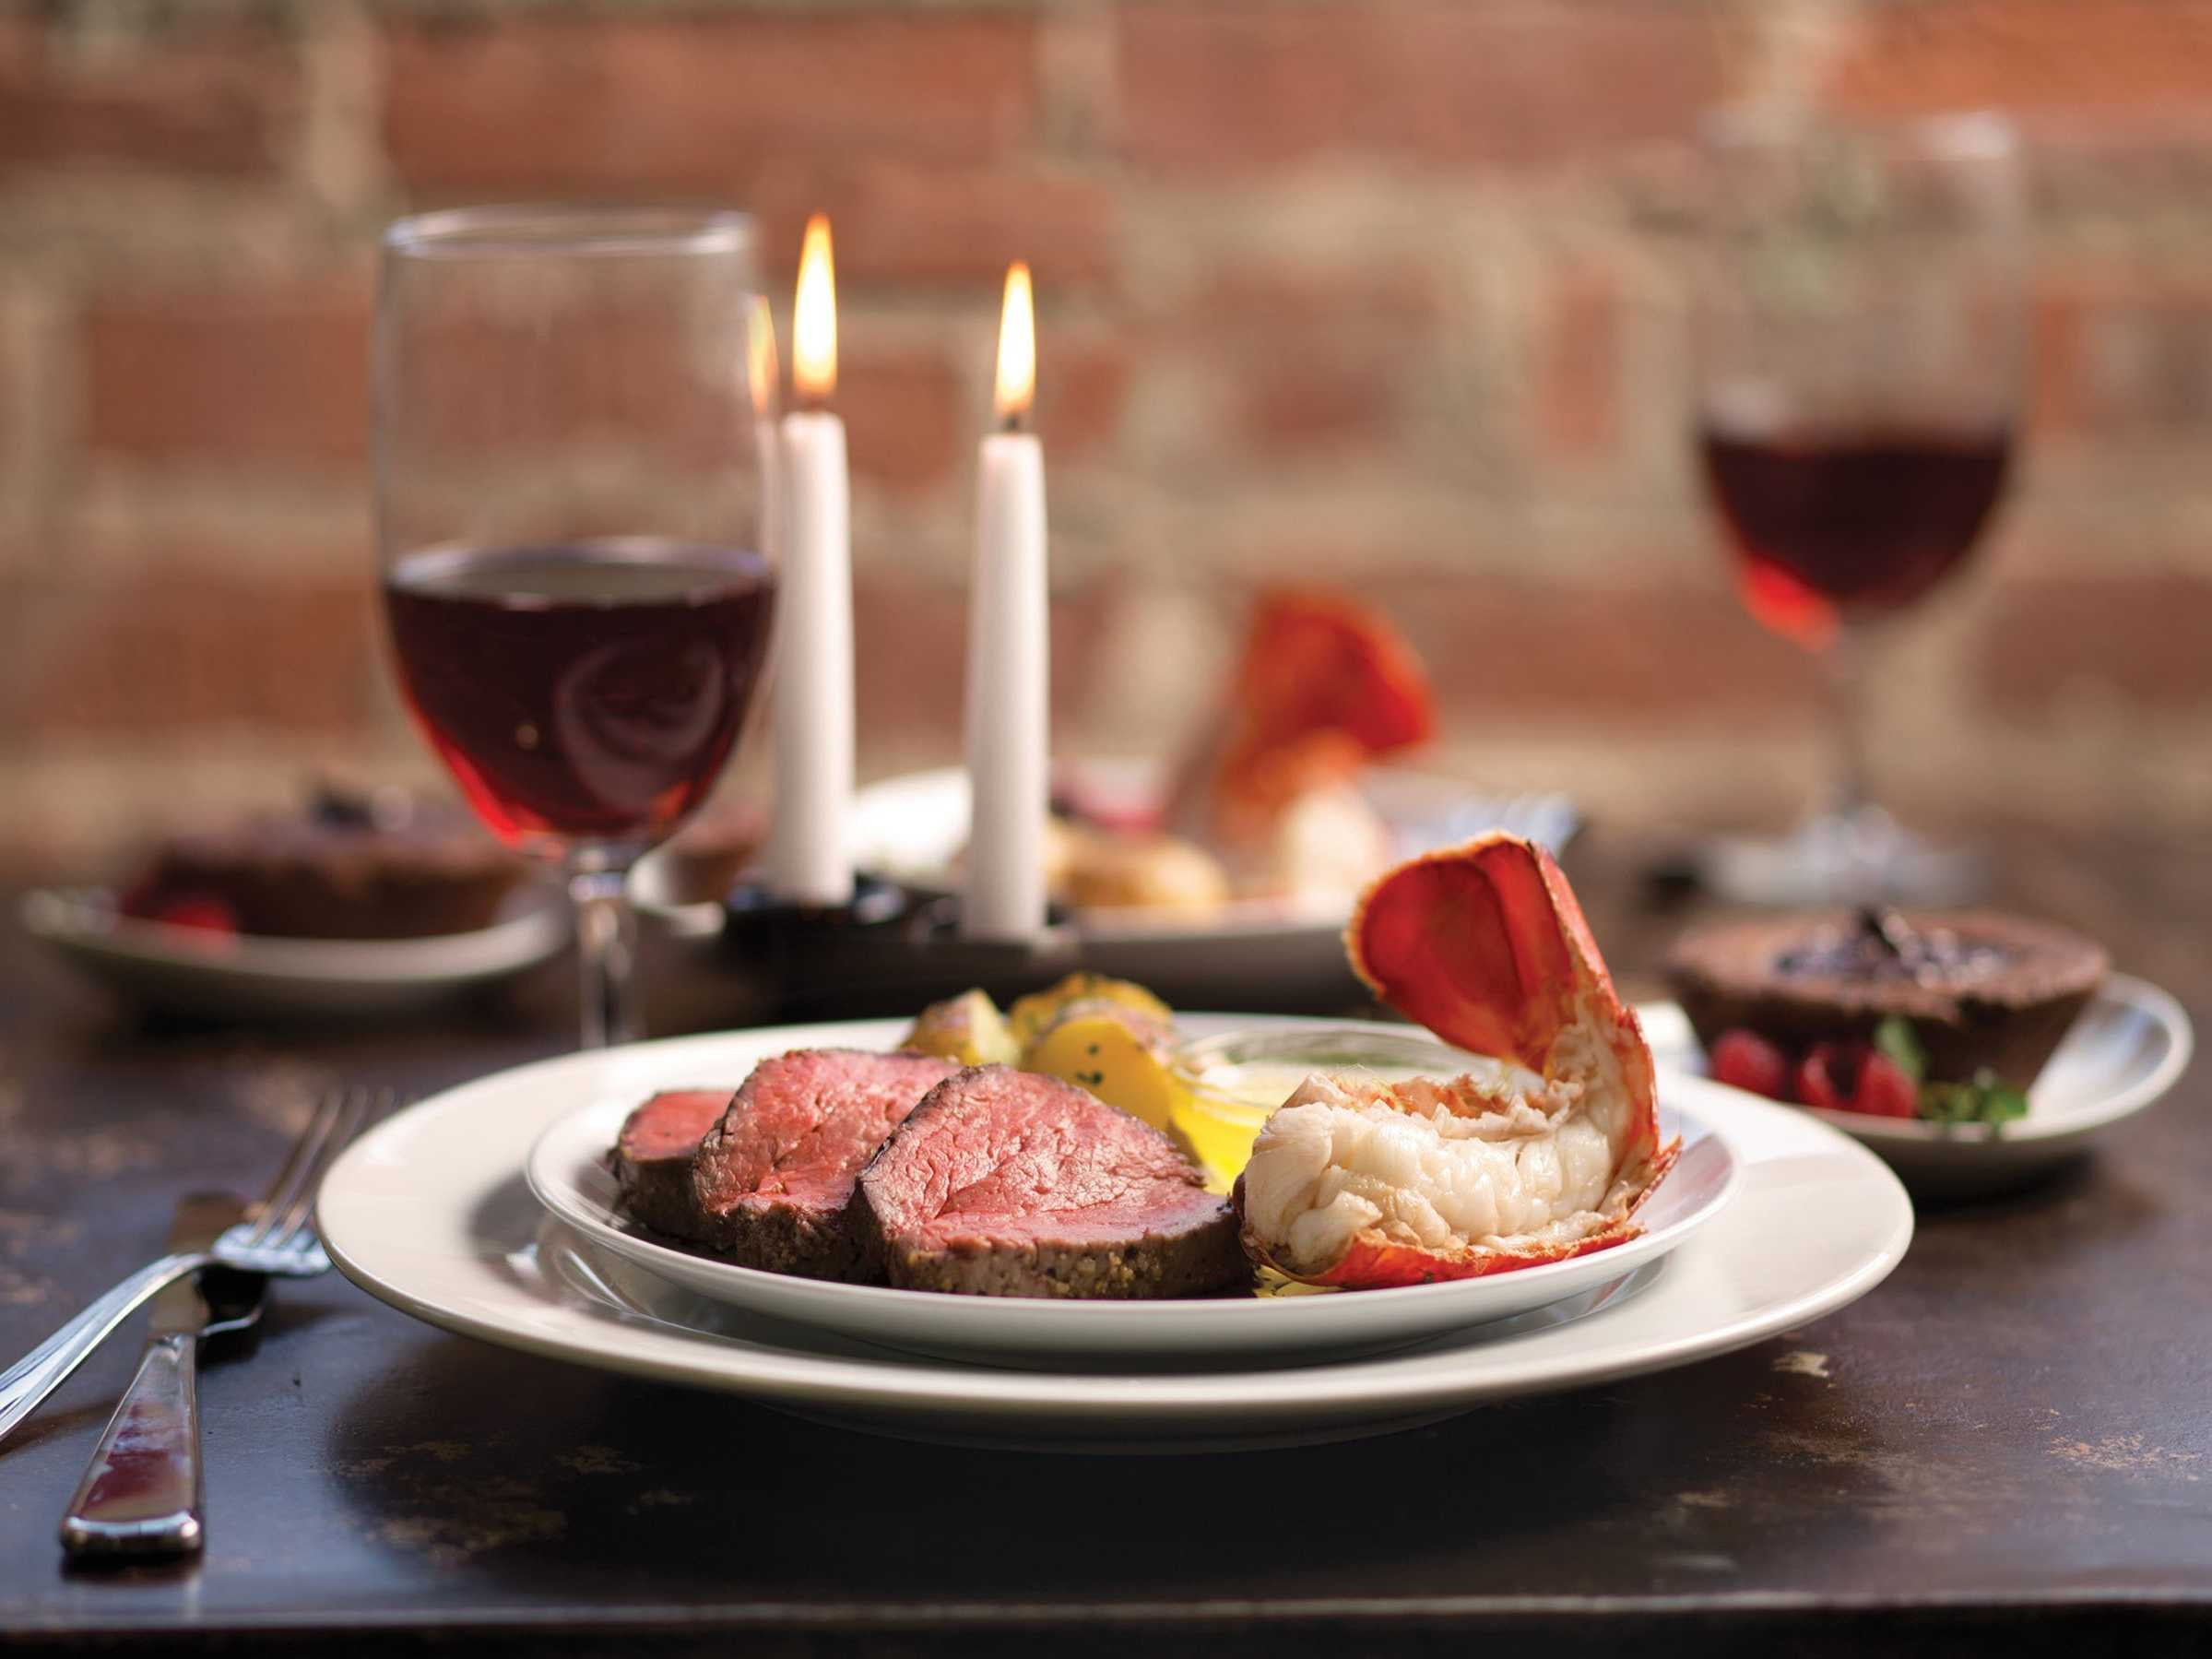 Valentines Day Romantic Dinner Ideas
 Valentines Dinner Ideas with 5 Lovingly Dishes